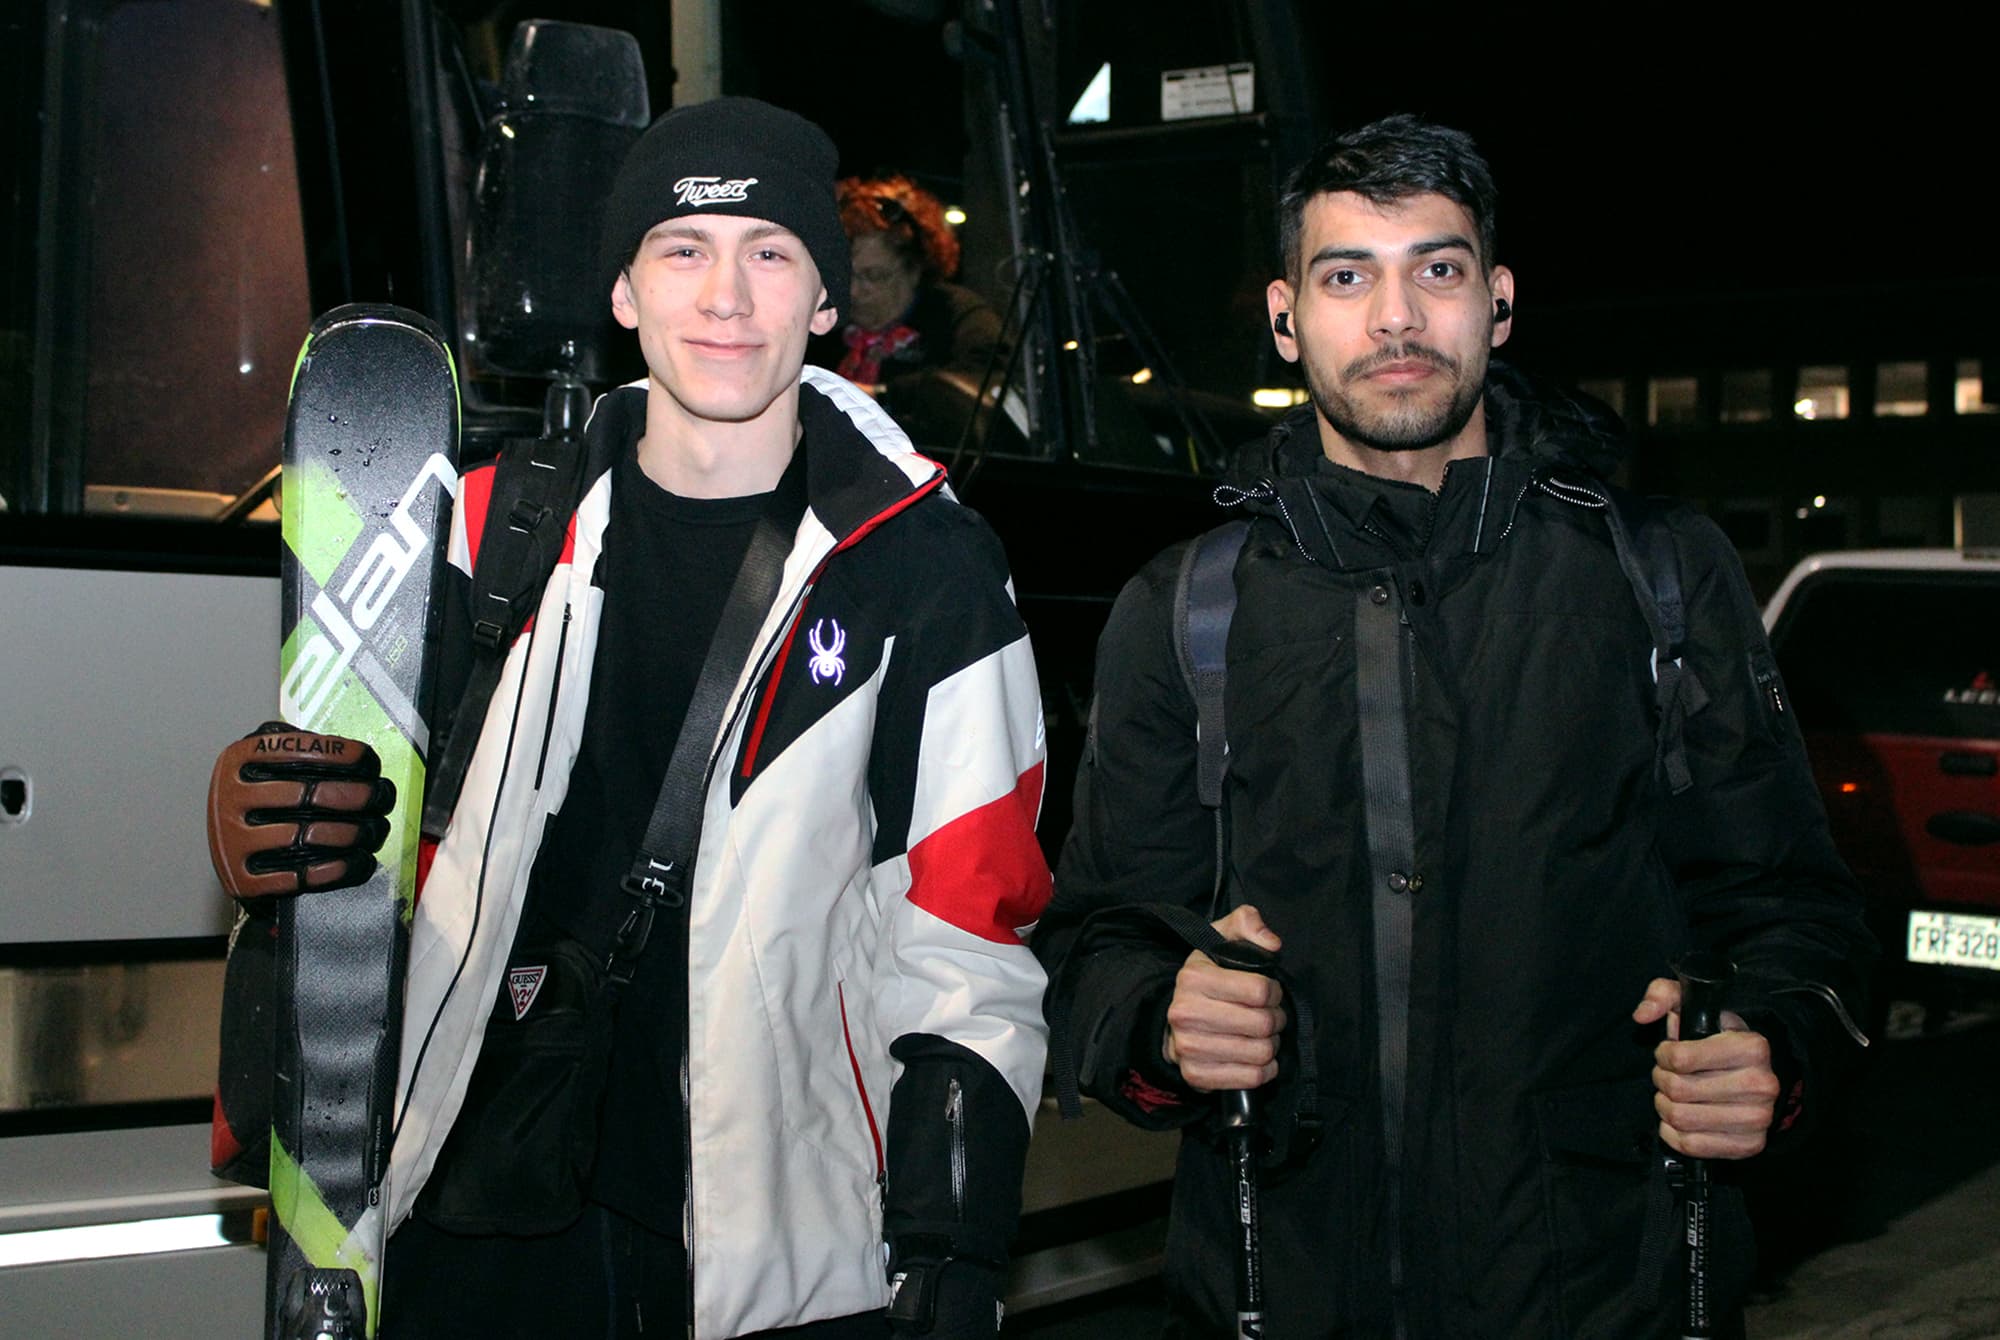 Cristiano Venucci (left) and Vivek Jaswal (right) stand in front of the bus after returning from a ski trip to Mont-Tremblant on Feb. 25.